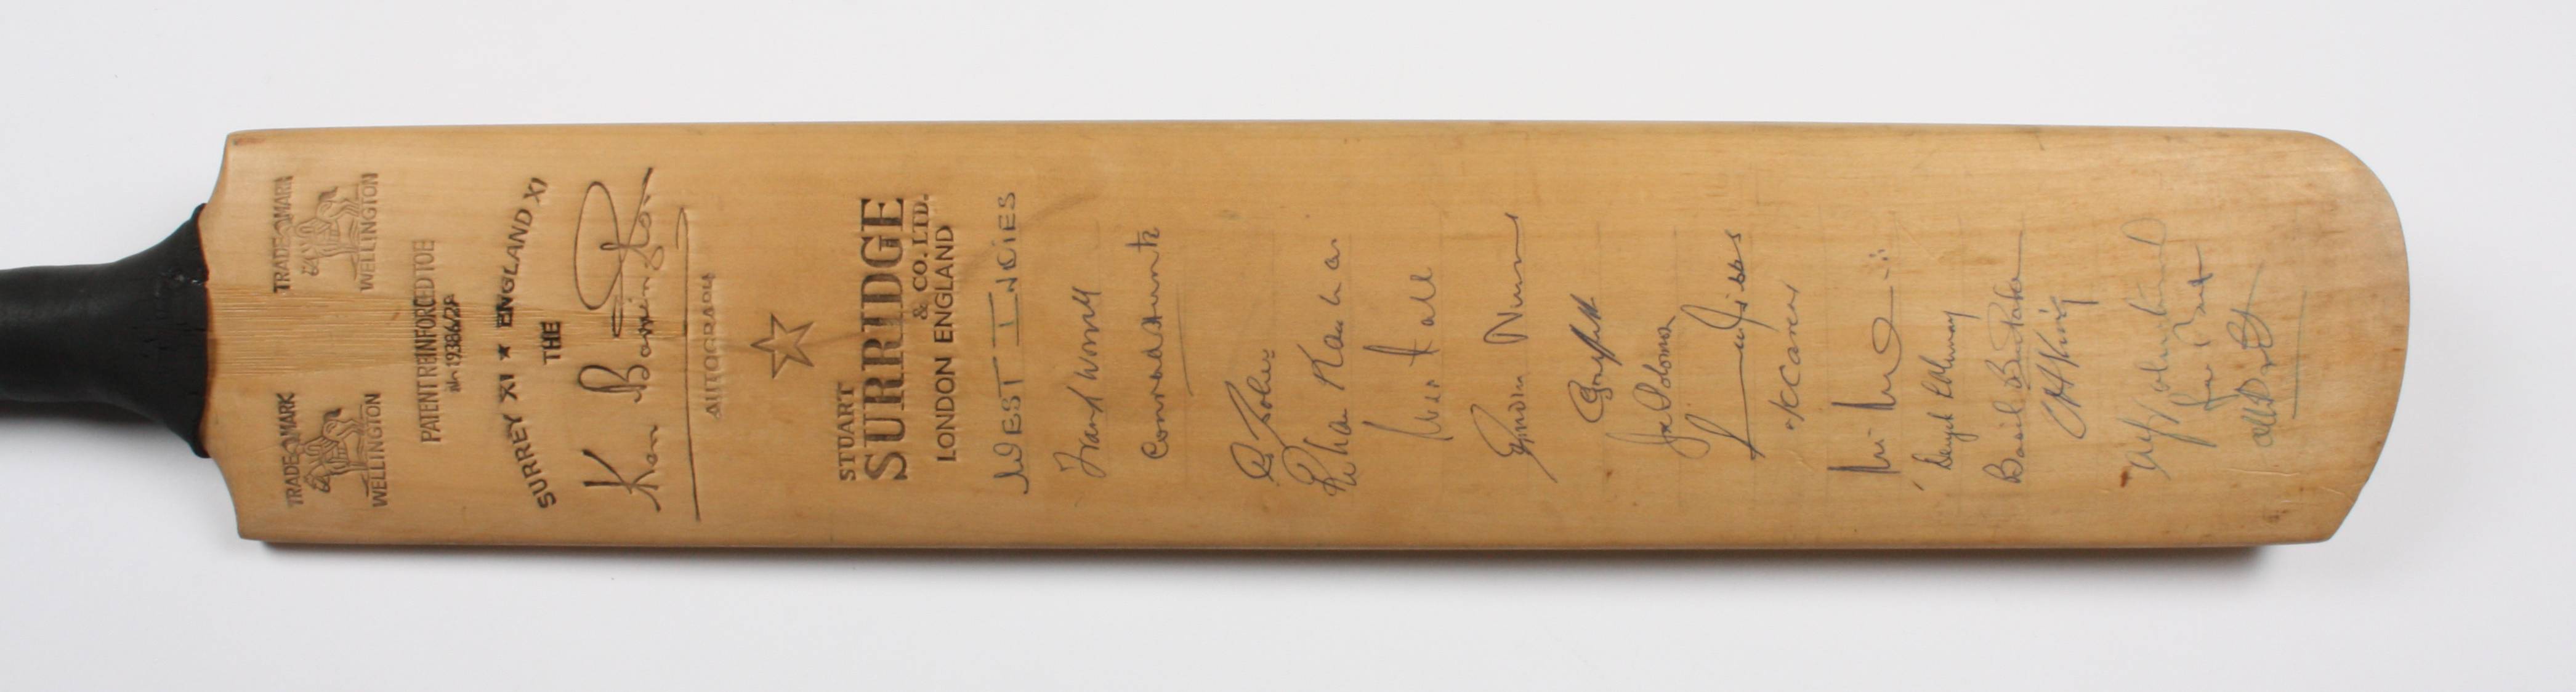 A 1960s signed Surridge cricket bat
signed by The West Indies, England, Surrey, Hampshire, Essex, - Image 4 of 4